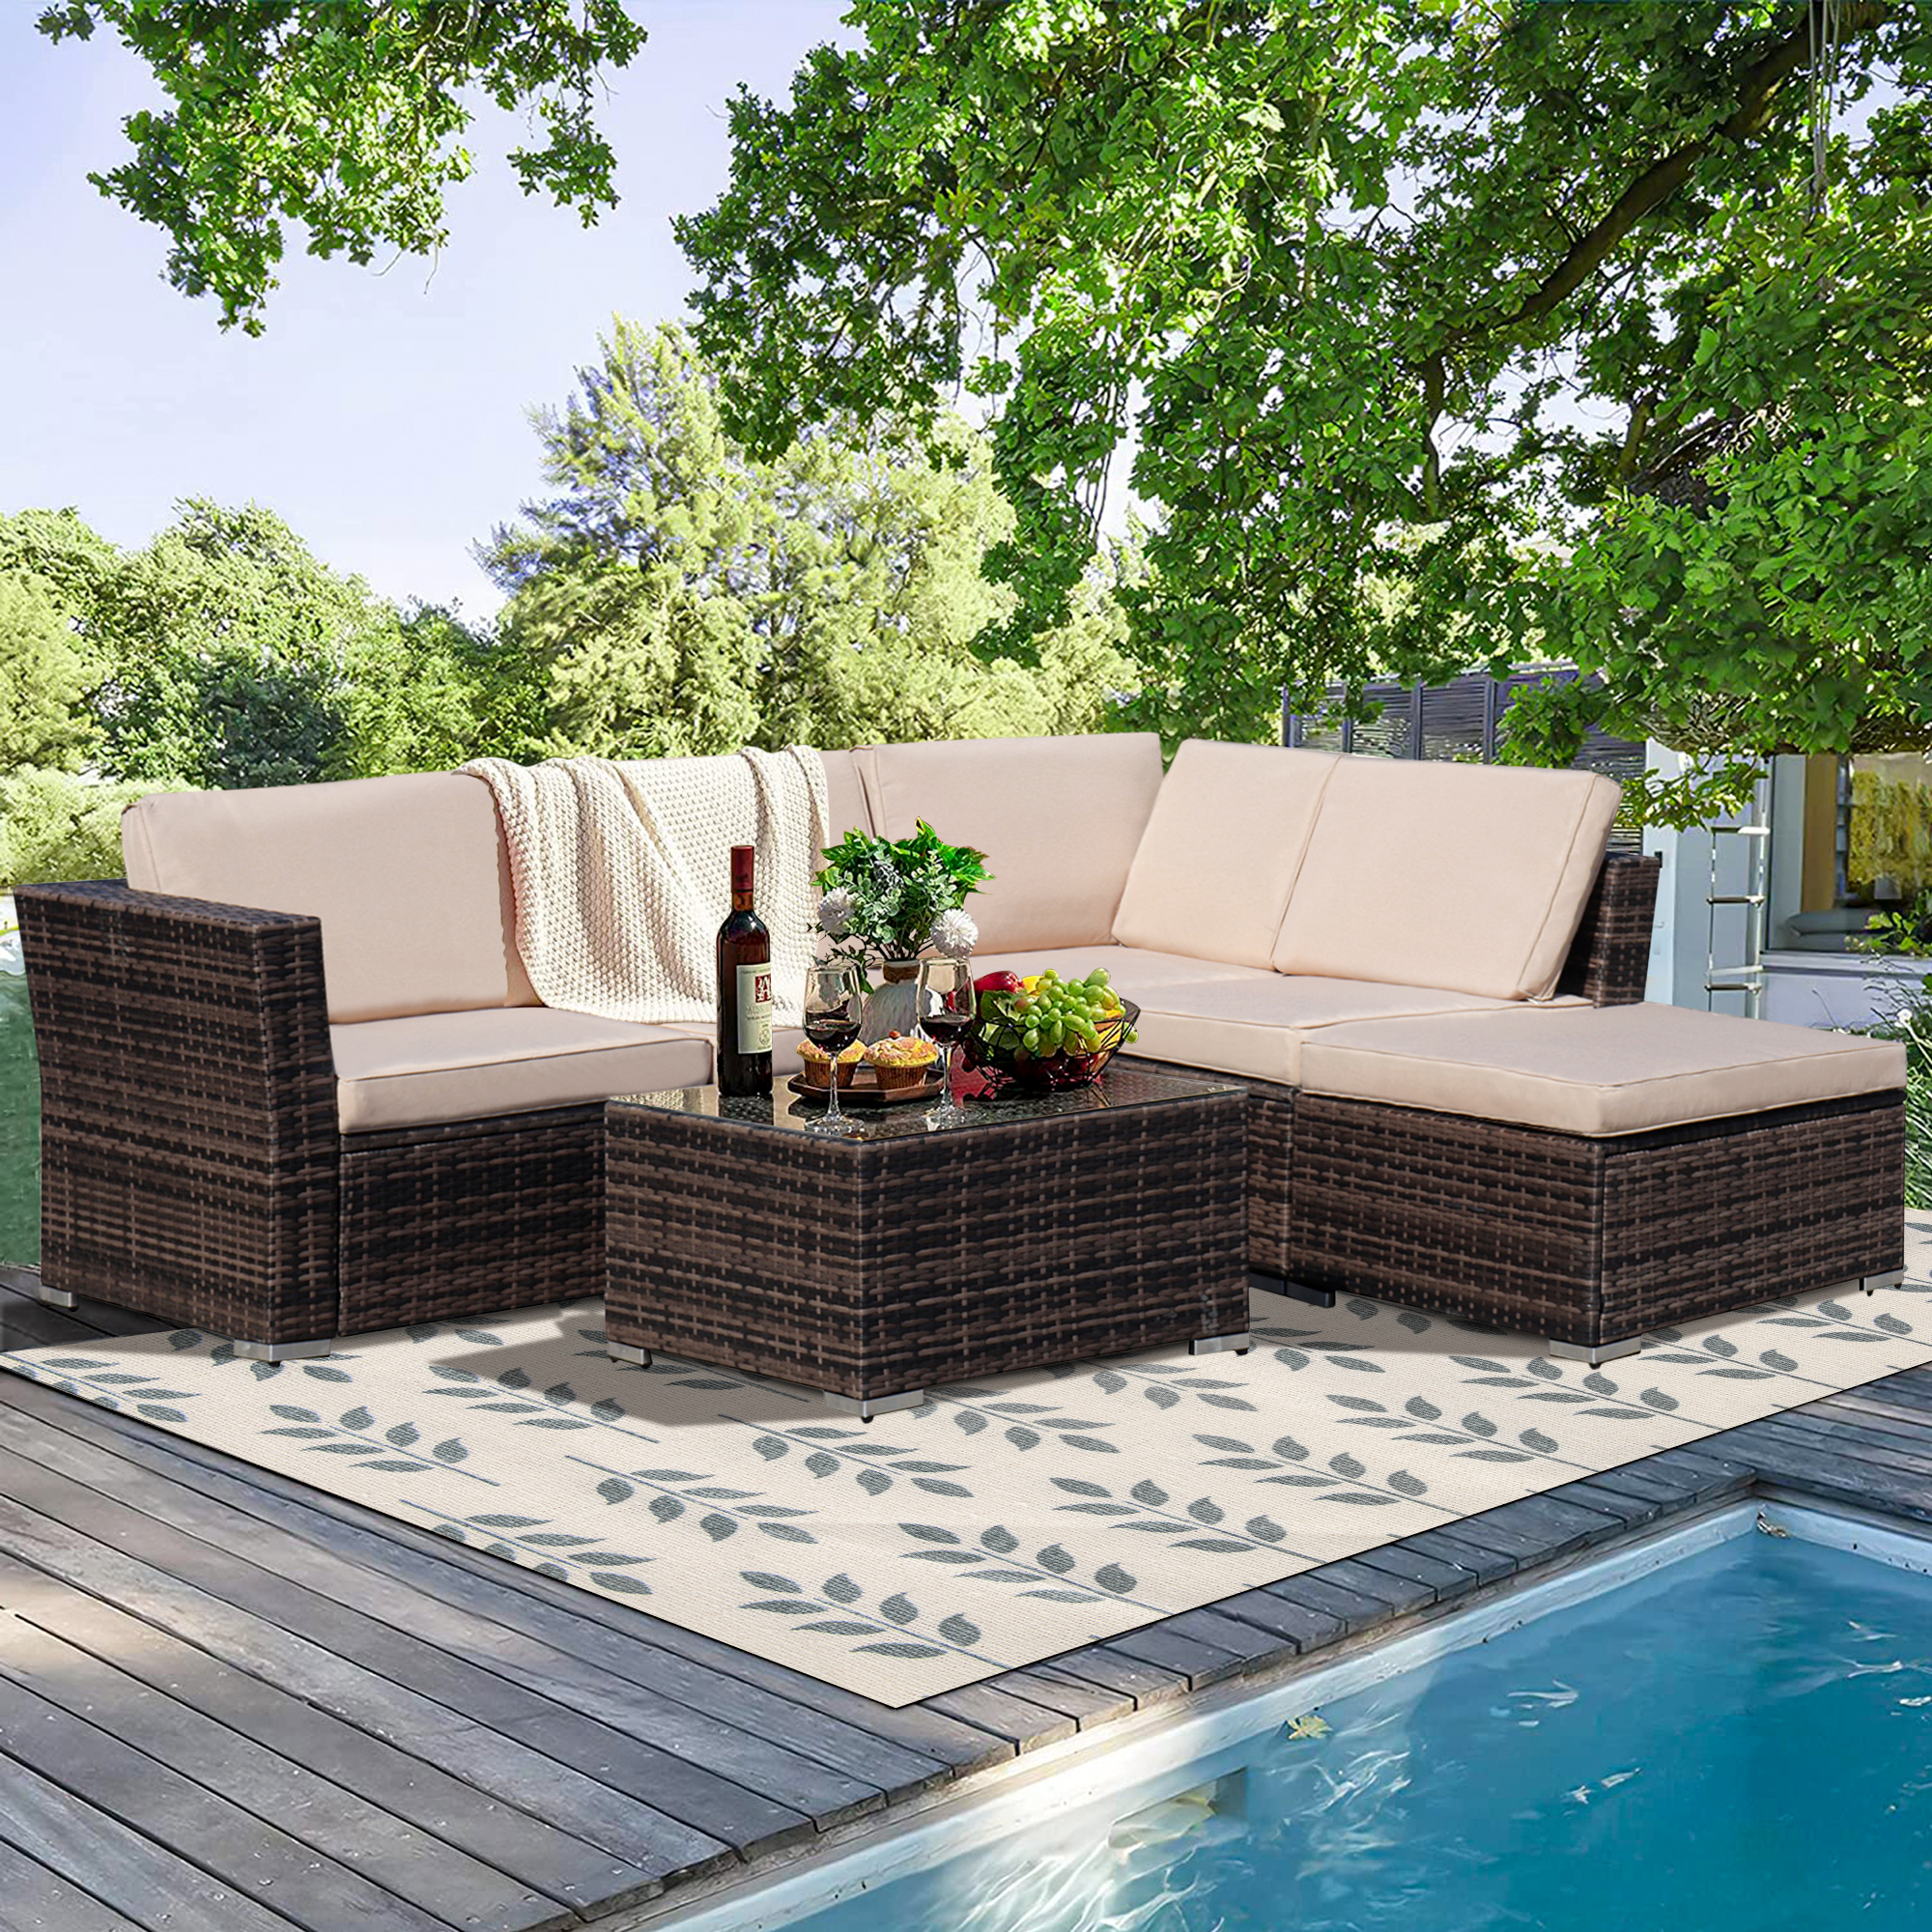 Outdoor Conversation Sets, 4 Piece Patio Furniture Sets with Loveseat Sofa, Lounge Chair, Wicker Chair, Coffee Table, Patio Sectional Sofa Set with Cushions for Backyard Garden Pool, LLL1326 - image 3 of 9